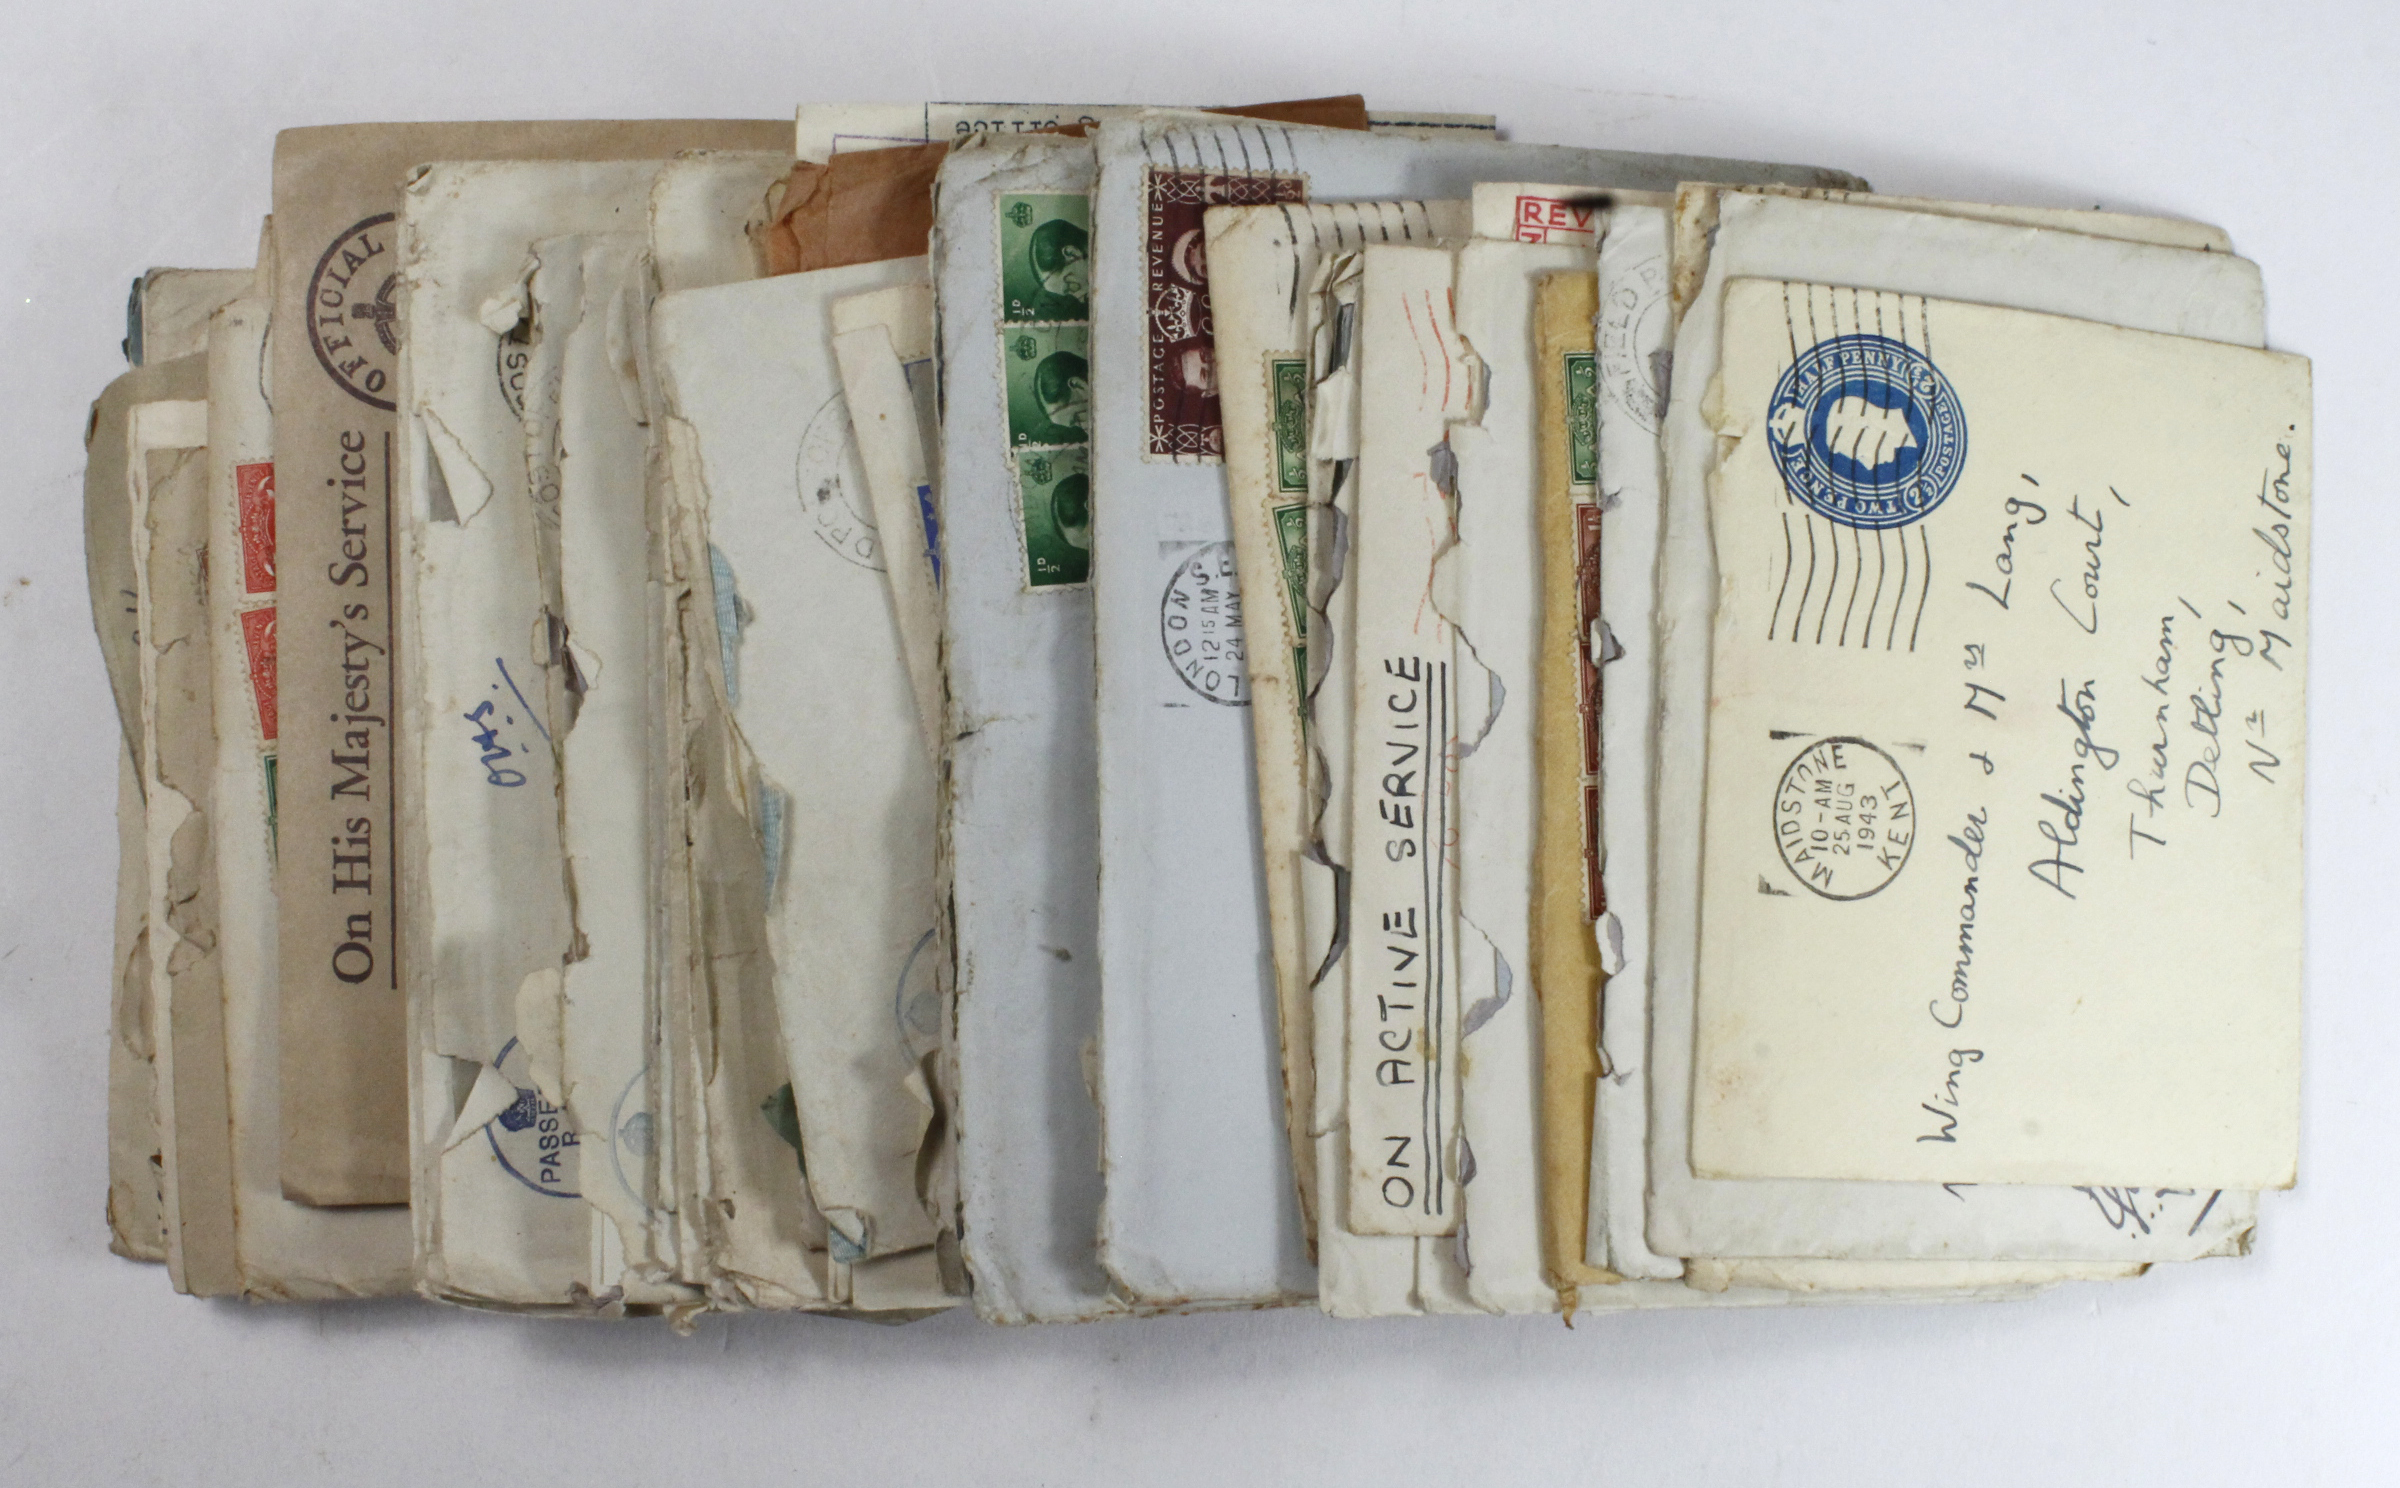 WW2 interest - bundle of letters with envelopes which appear to be between husband and wife, Wing